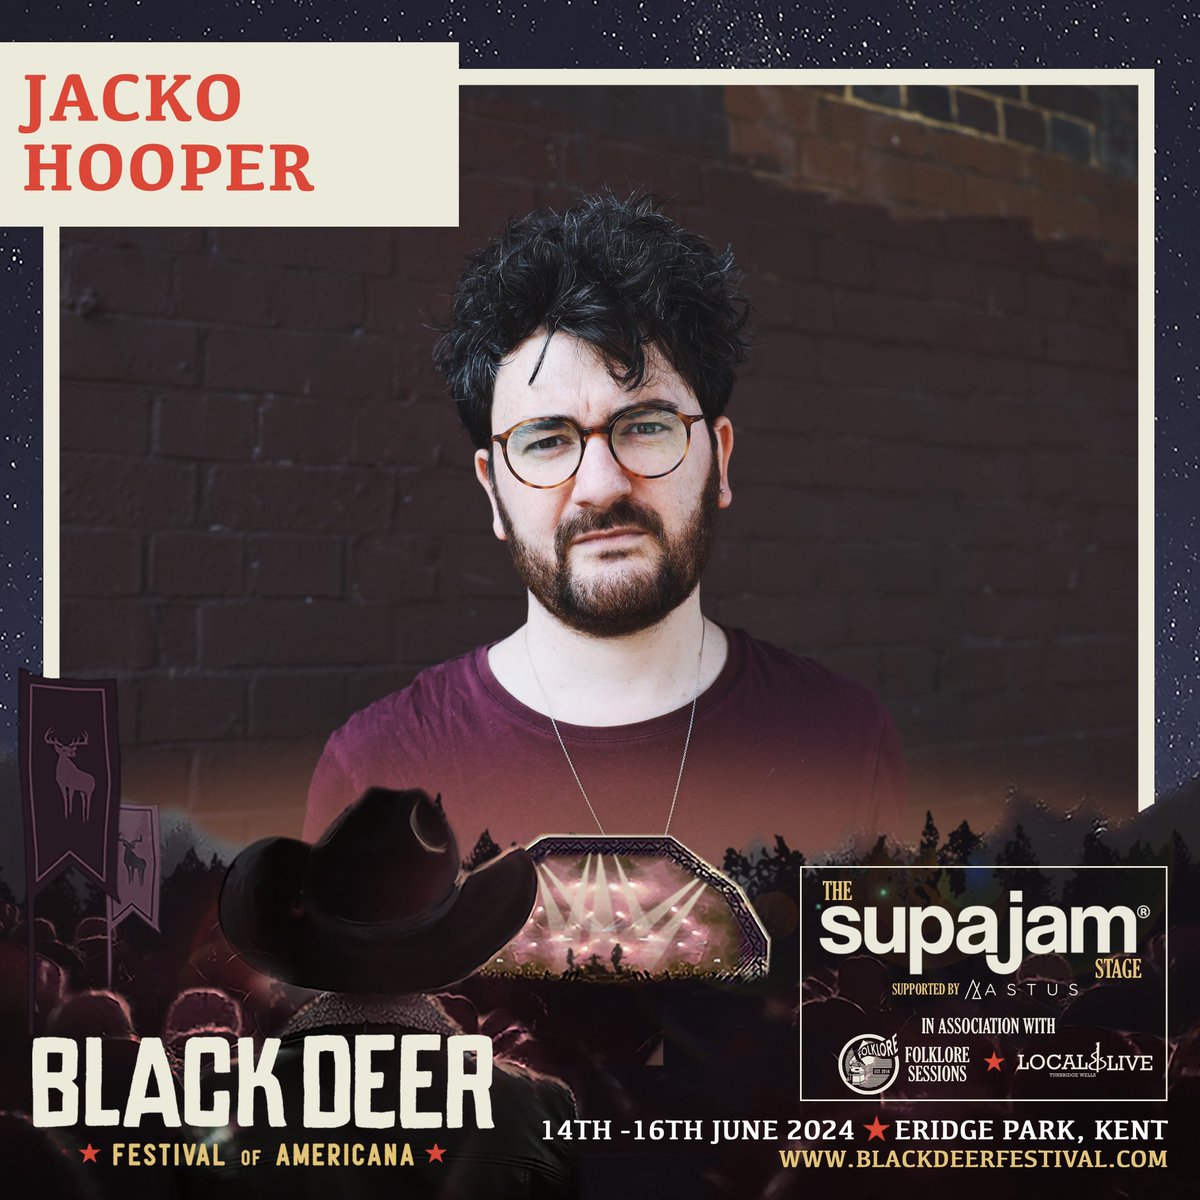 I’m beyond thrilled to announce I will be playing at @blackdeerfest this year 🖤 Tickets are available now via blackdeerfestival.com Jx